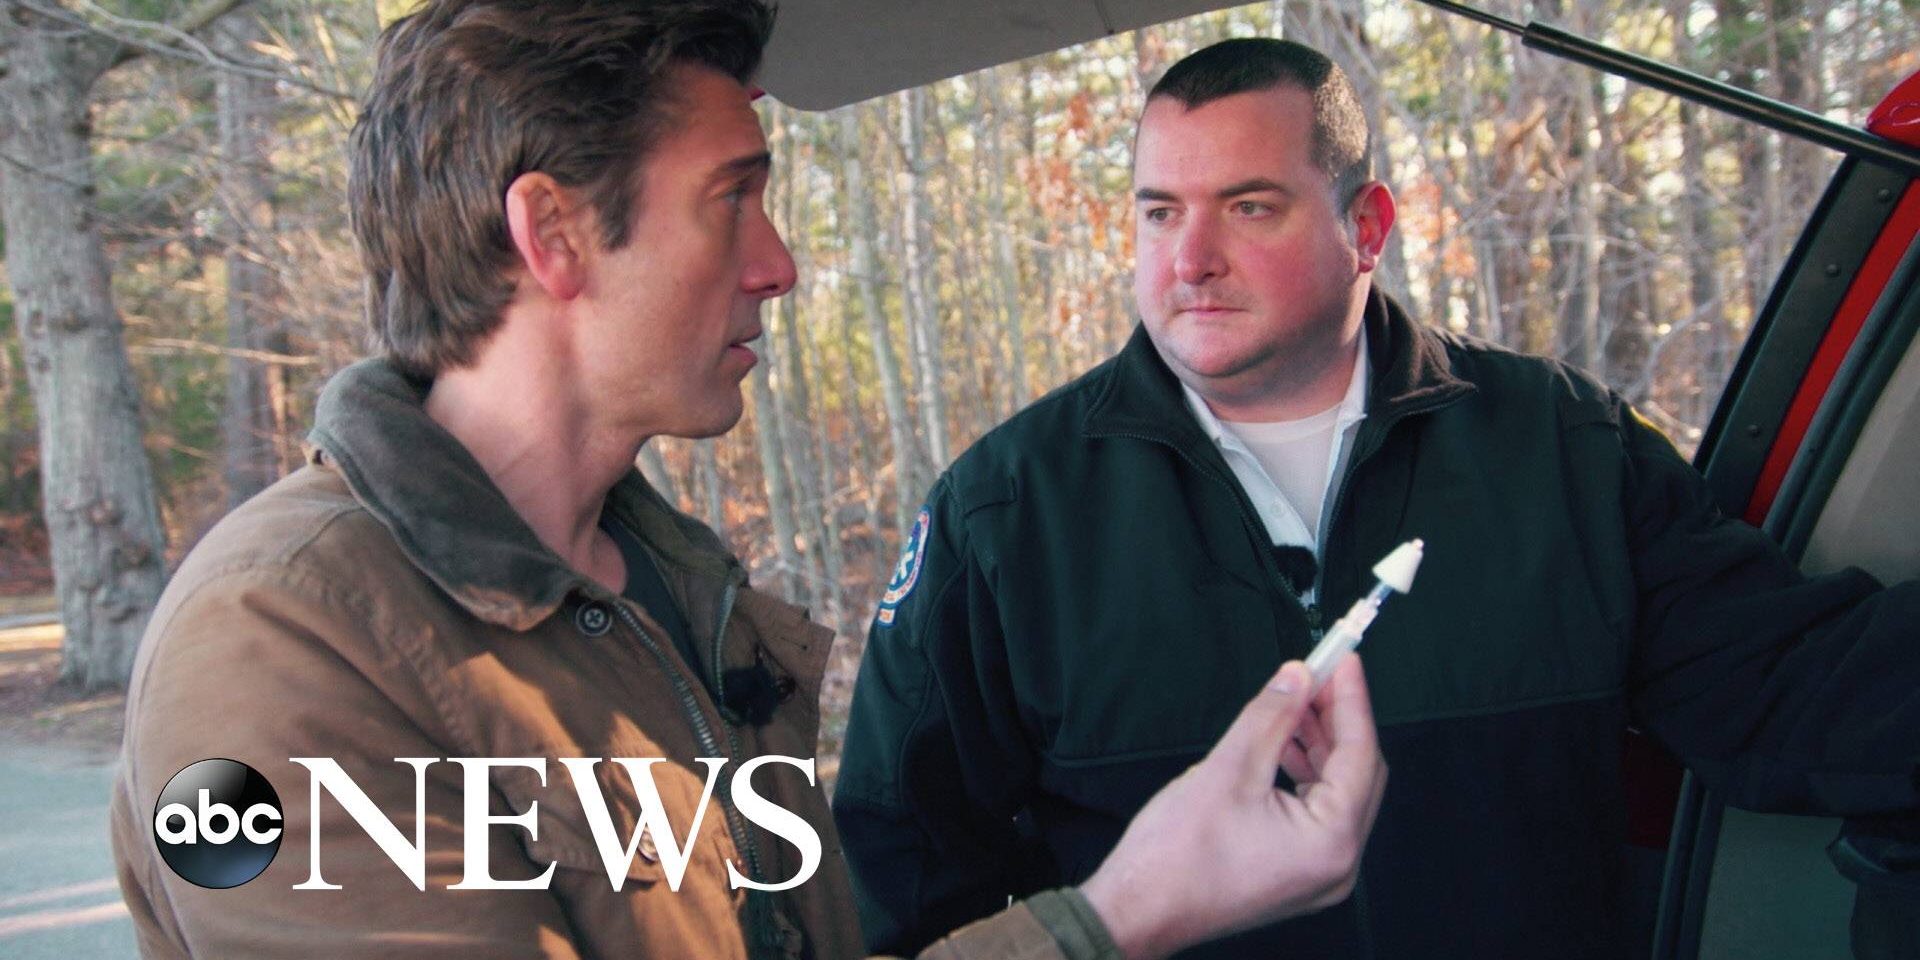 abc News logo on image of man holding syringe next to another man at the back of a vehicle.